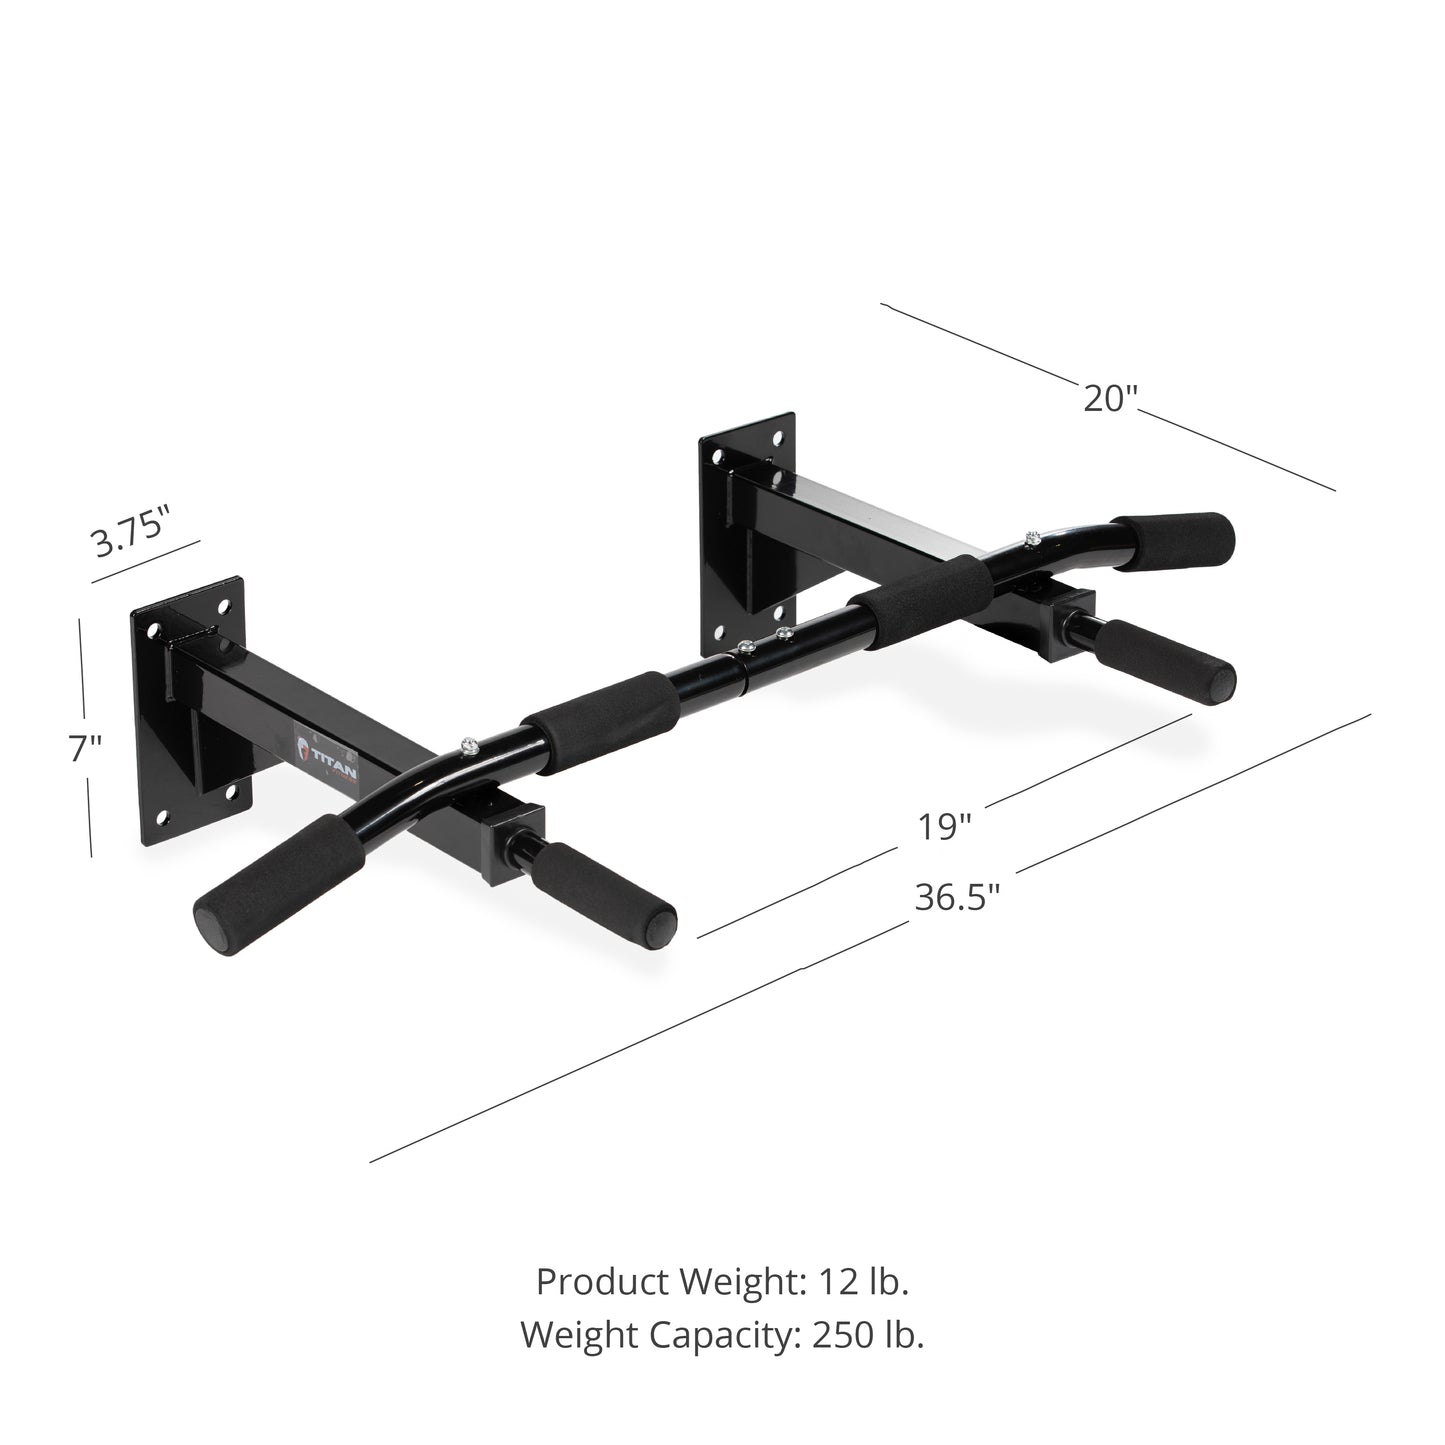 3 Position Wall-Mounted Pull-Up Bar - view 7